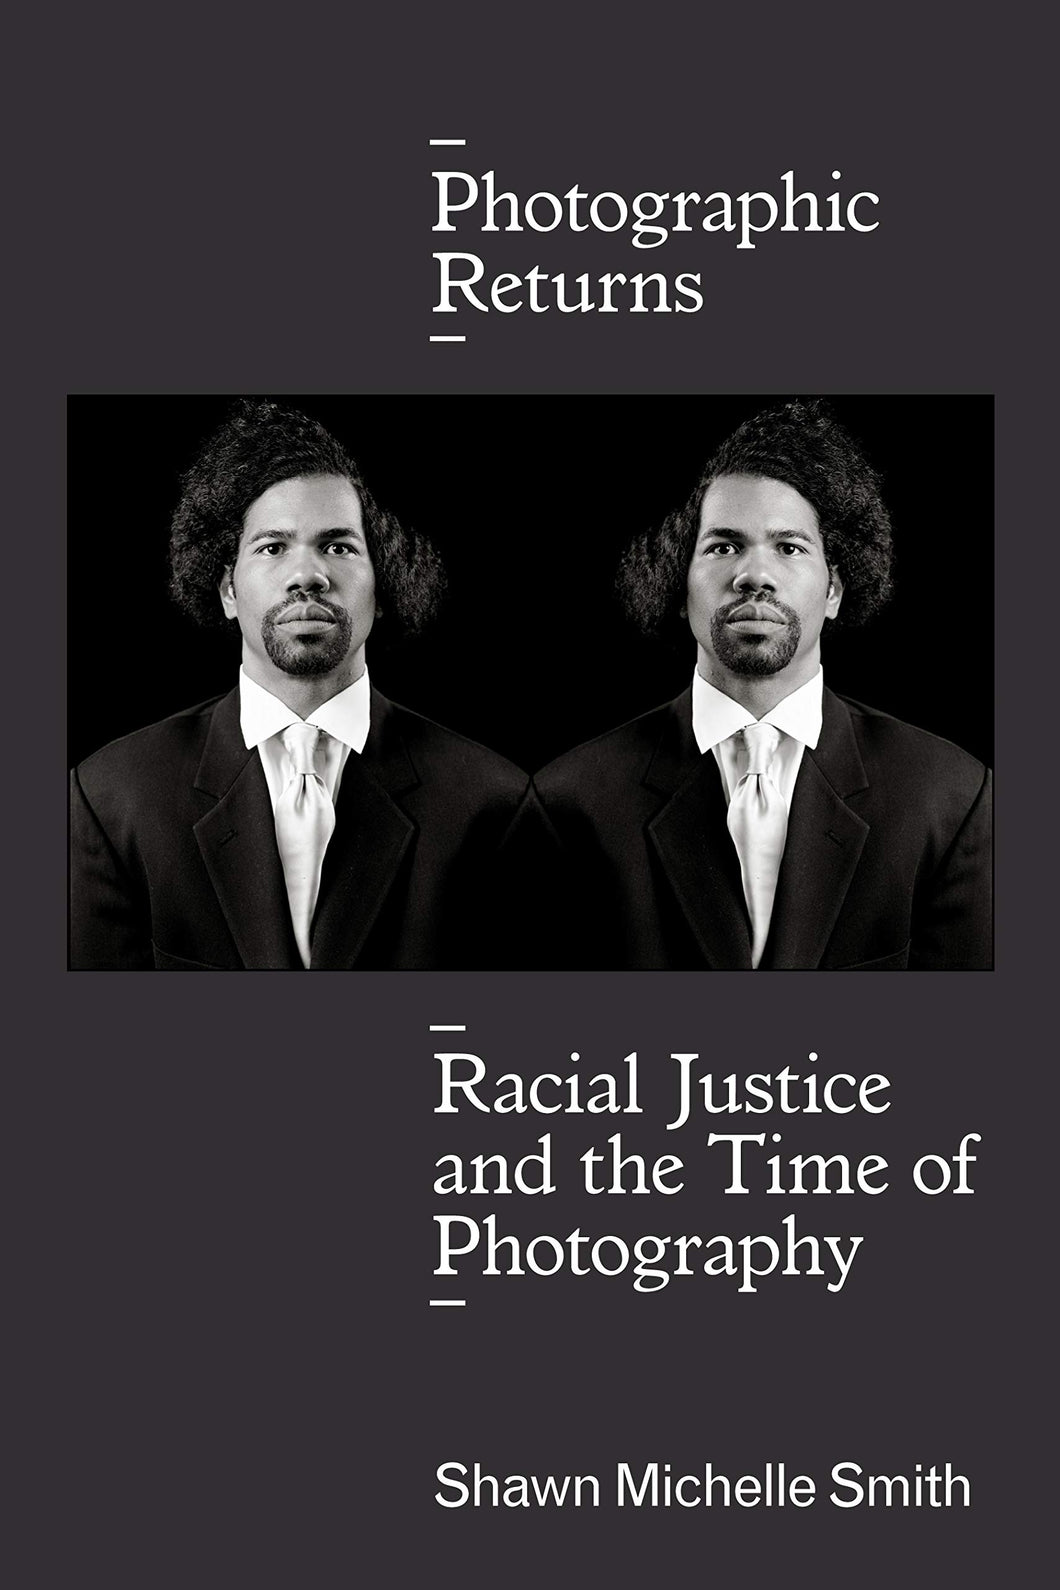 Photographic Returns: Racial Justice and the Time of Photography by Shawn Michelle Smith